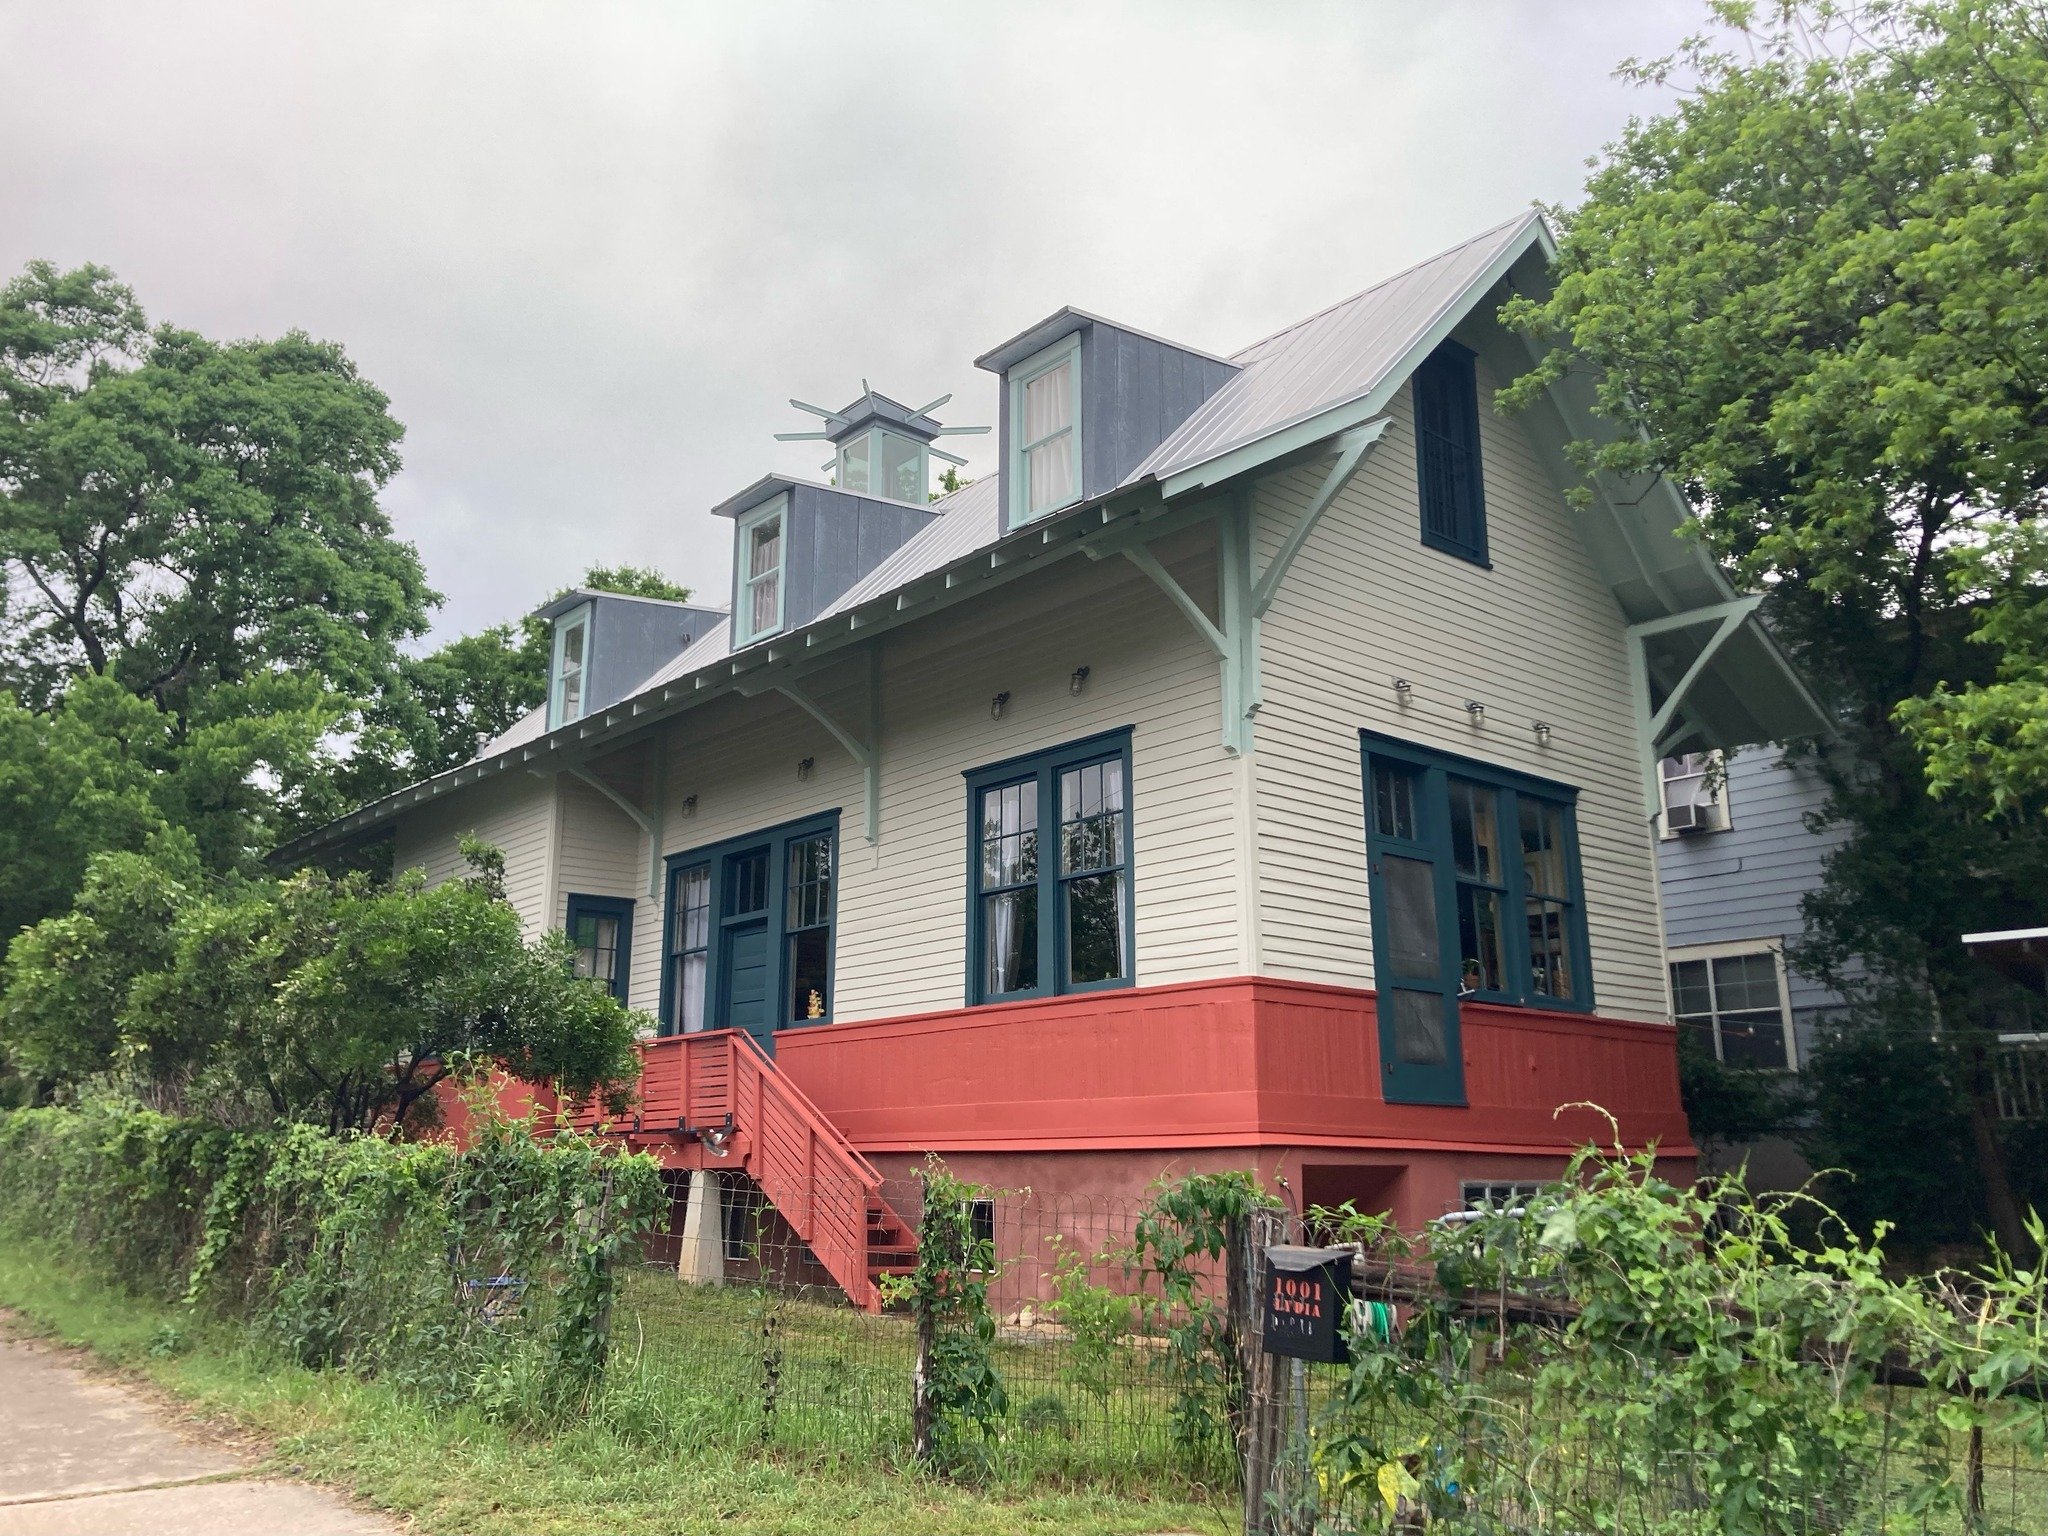 🌟 Celebrate Preservation Month with us! This winter, we funded $15K for historic preservation projects across Austin, and we can't wait to spotlight our amazing awardees throughout the month of May! 💫 

In honor of Preservation Month, support this 